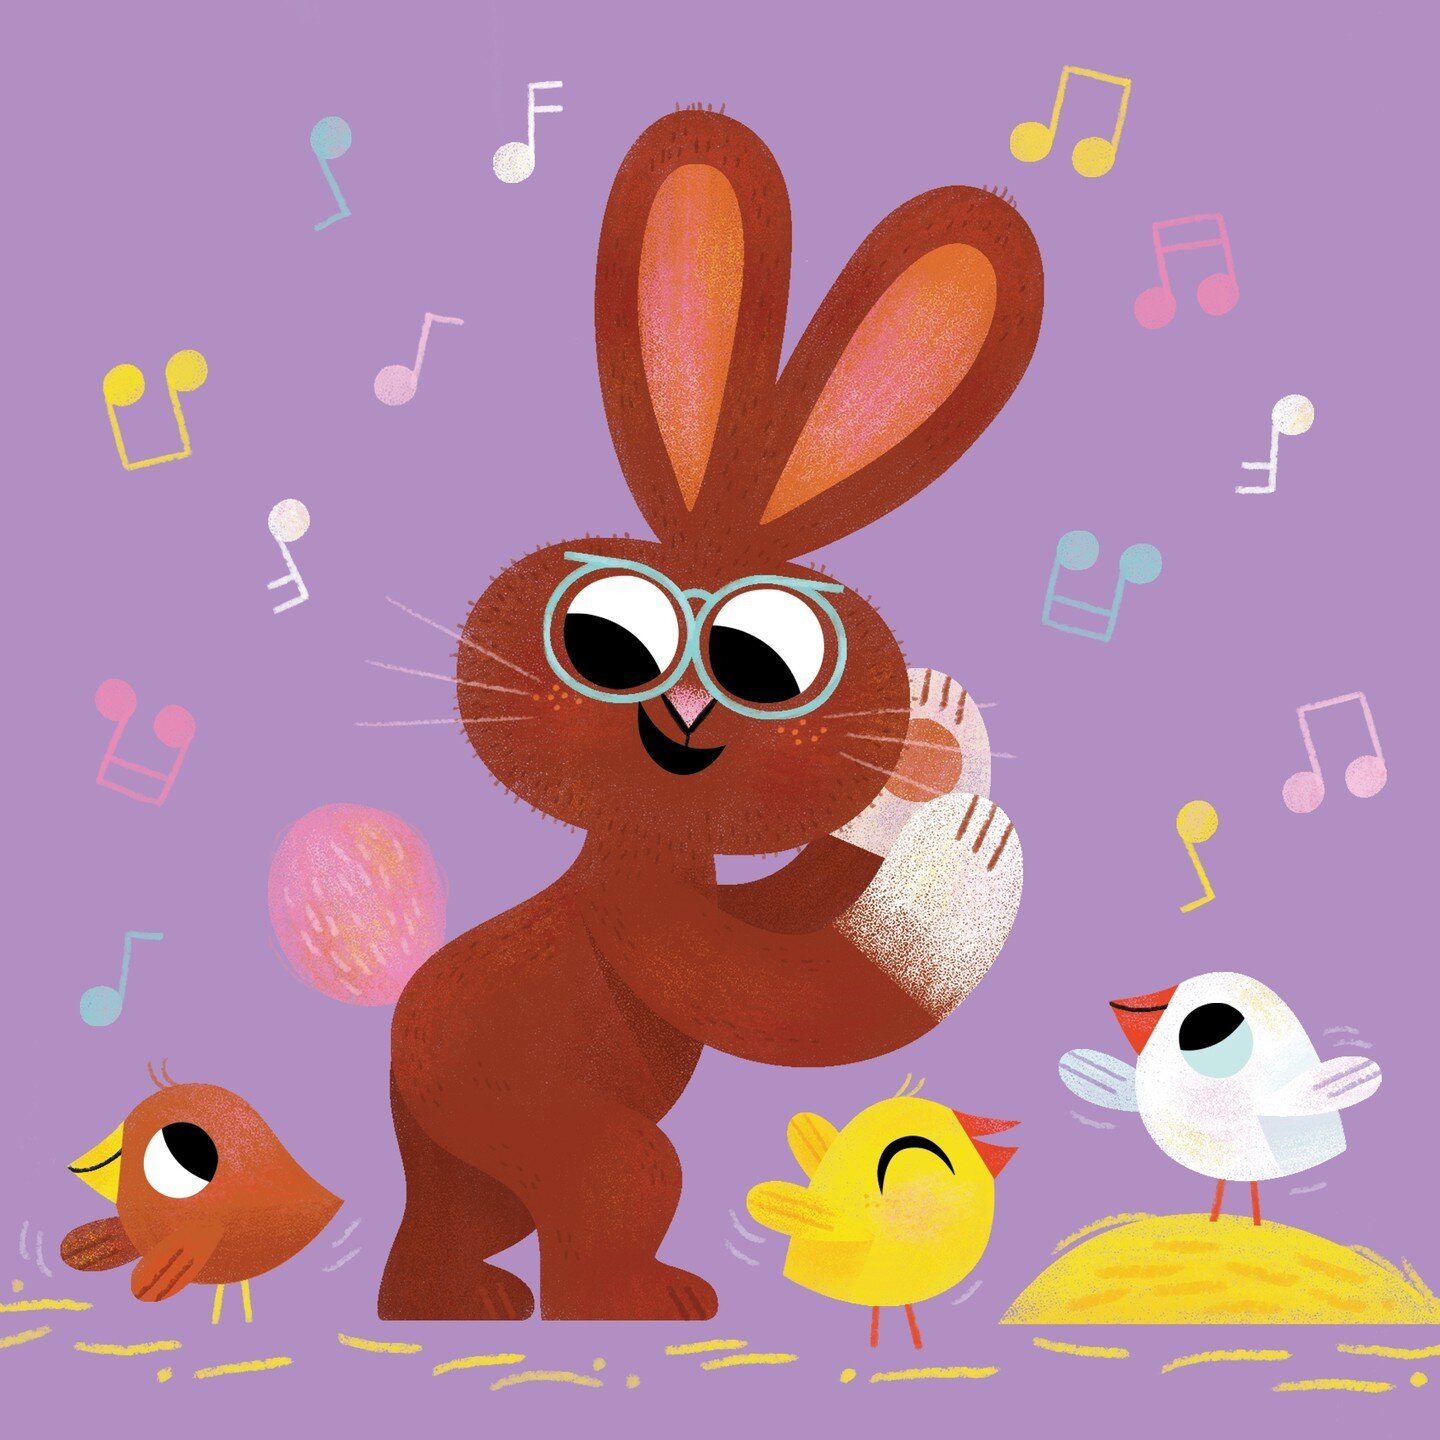 'Do a chicken dance, peep-peeping!' A little snippet from Every Bunny Dance Now! written by NYTimes best seller Joan Holub and illustrated by me - available in bookstores today! 🐣 🐰 🐥